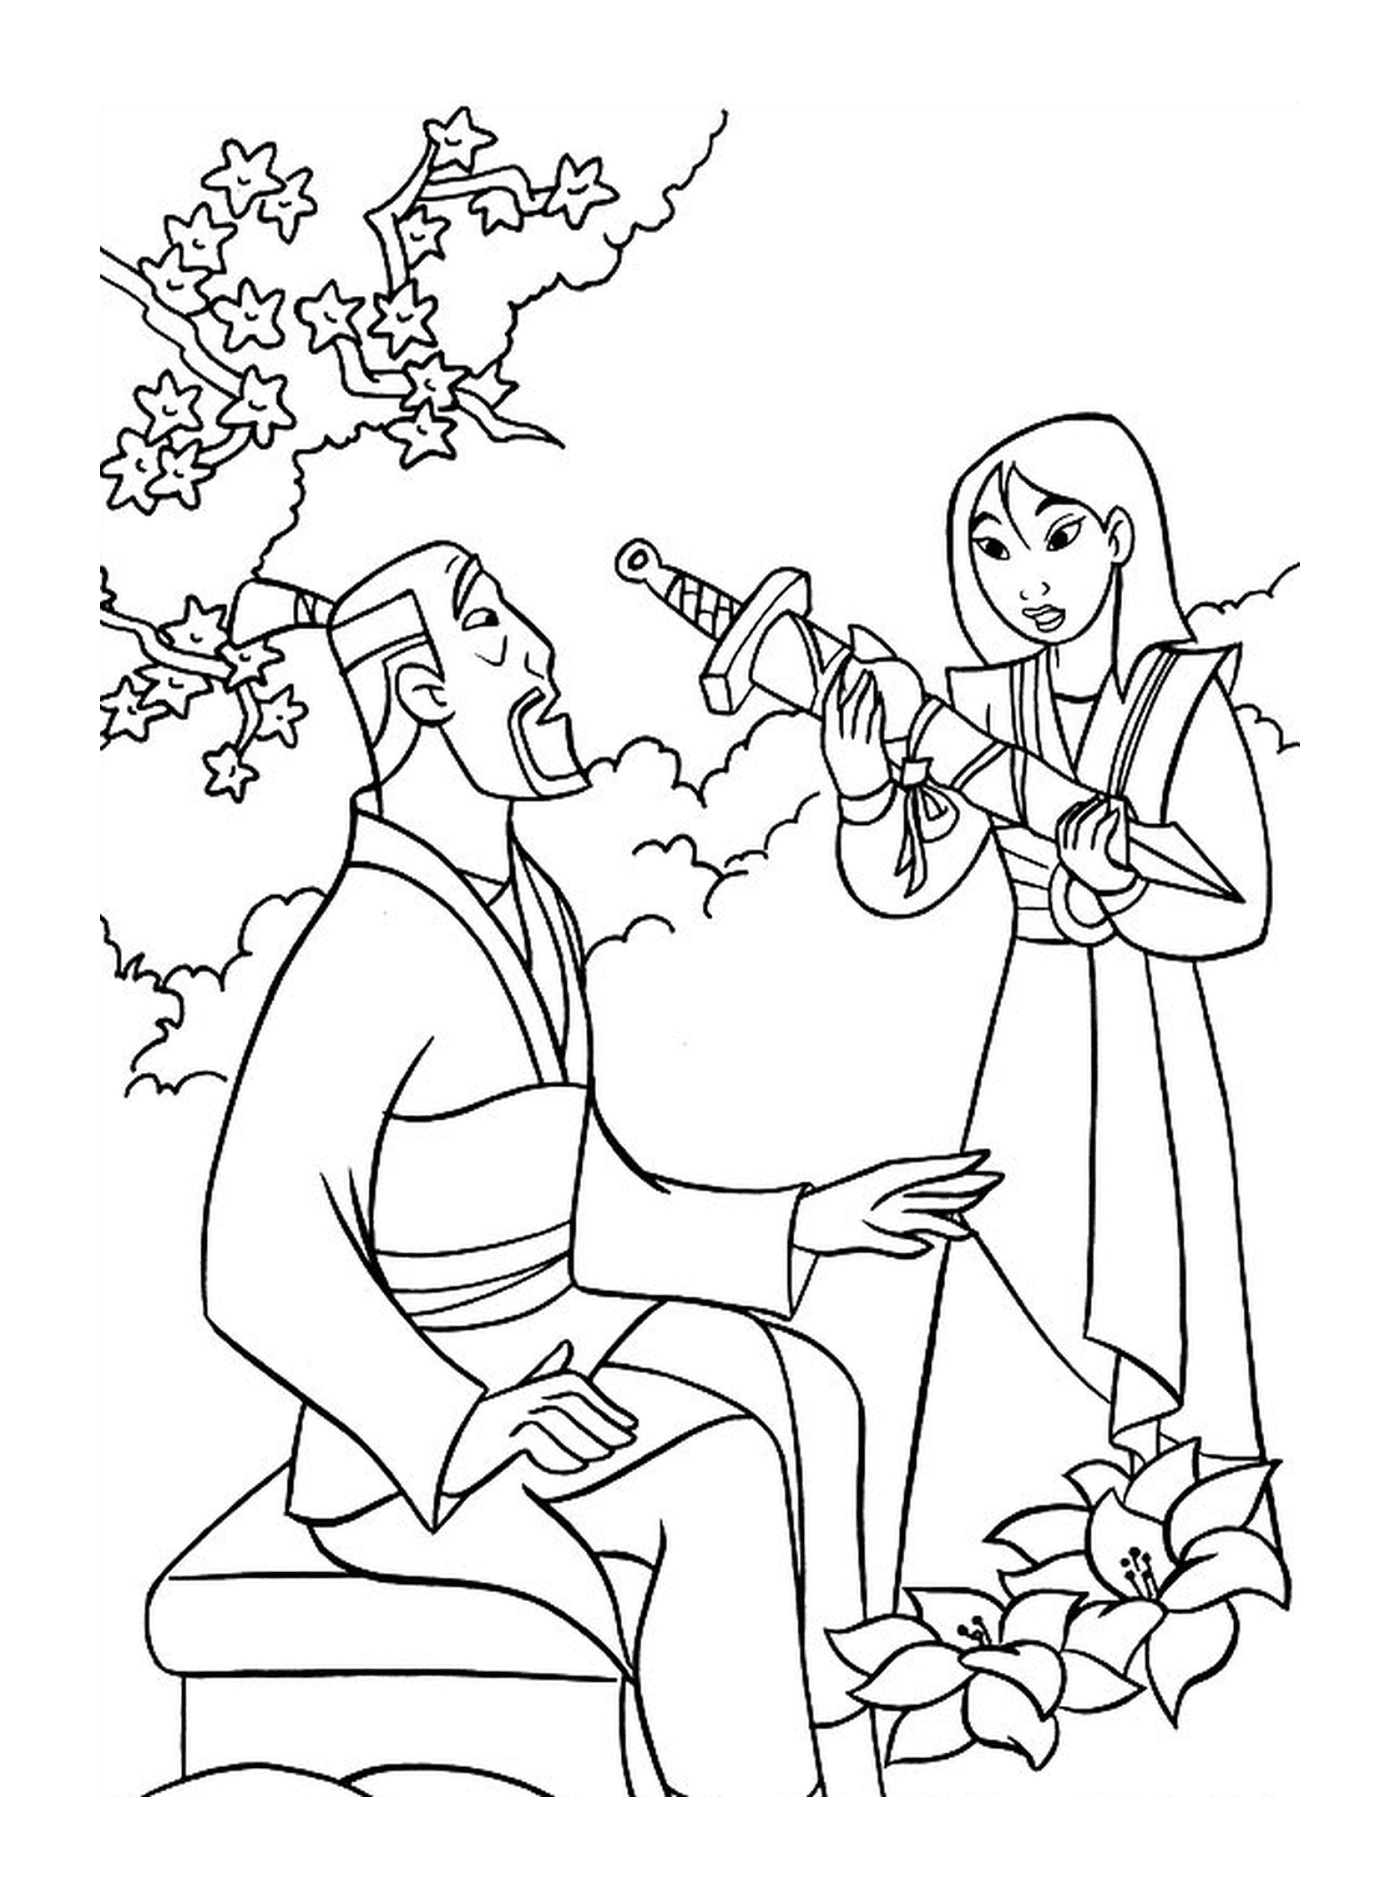  Mulan and his father, musicians 